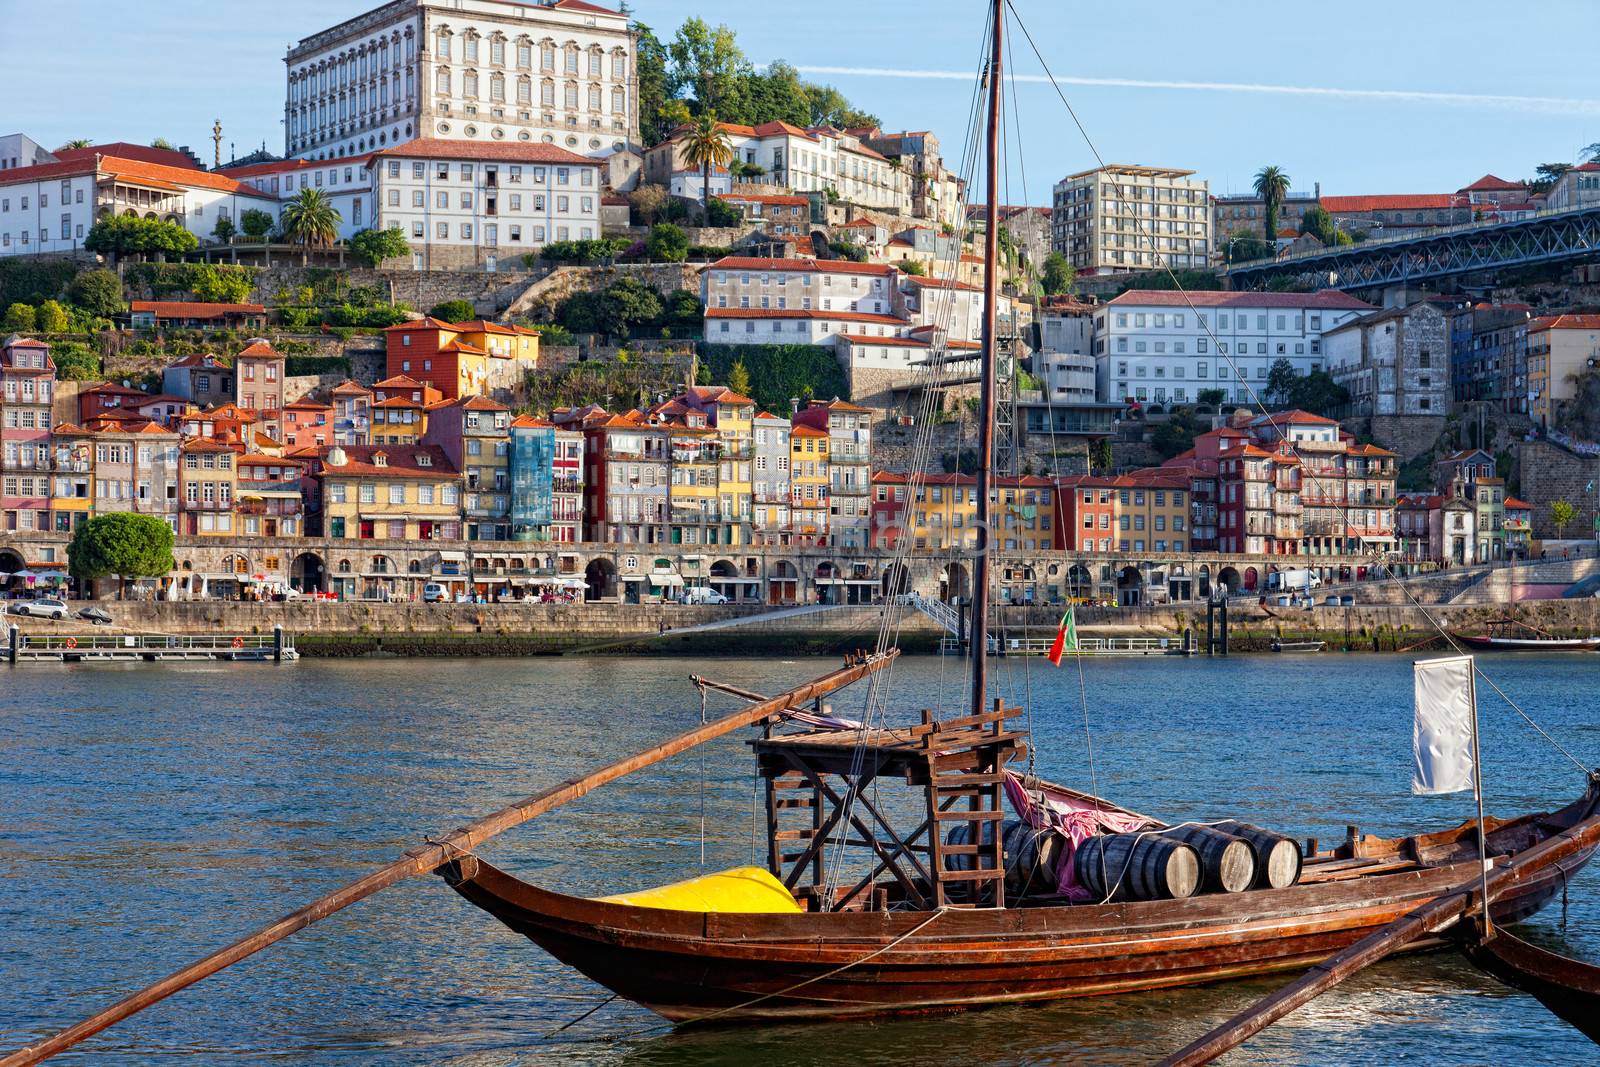 old Porto and traditional boats with wine barrels, Portugal by elena_shchipkova